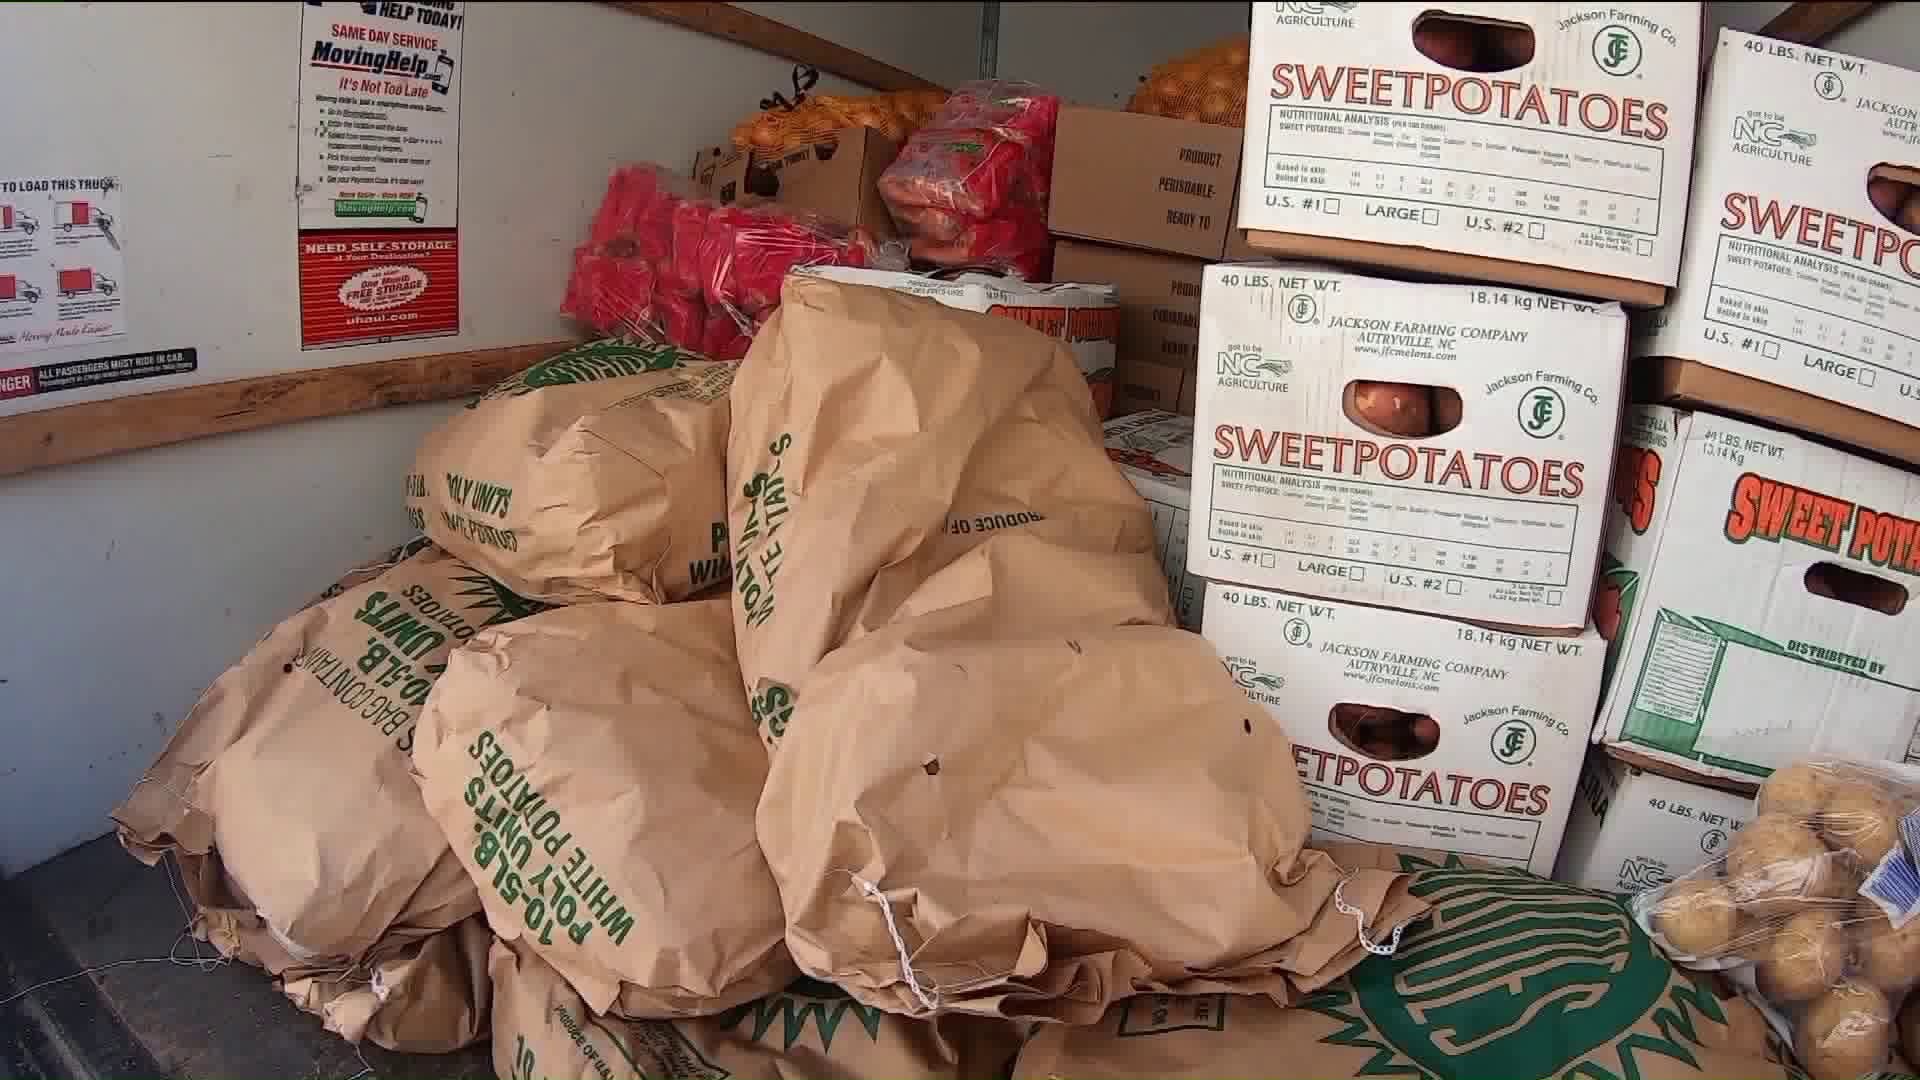 18,000 turkeys distributed to local food pantries